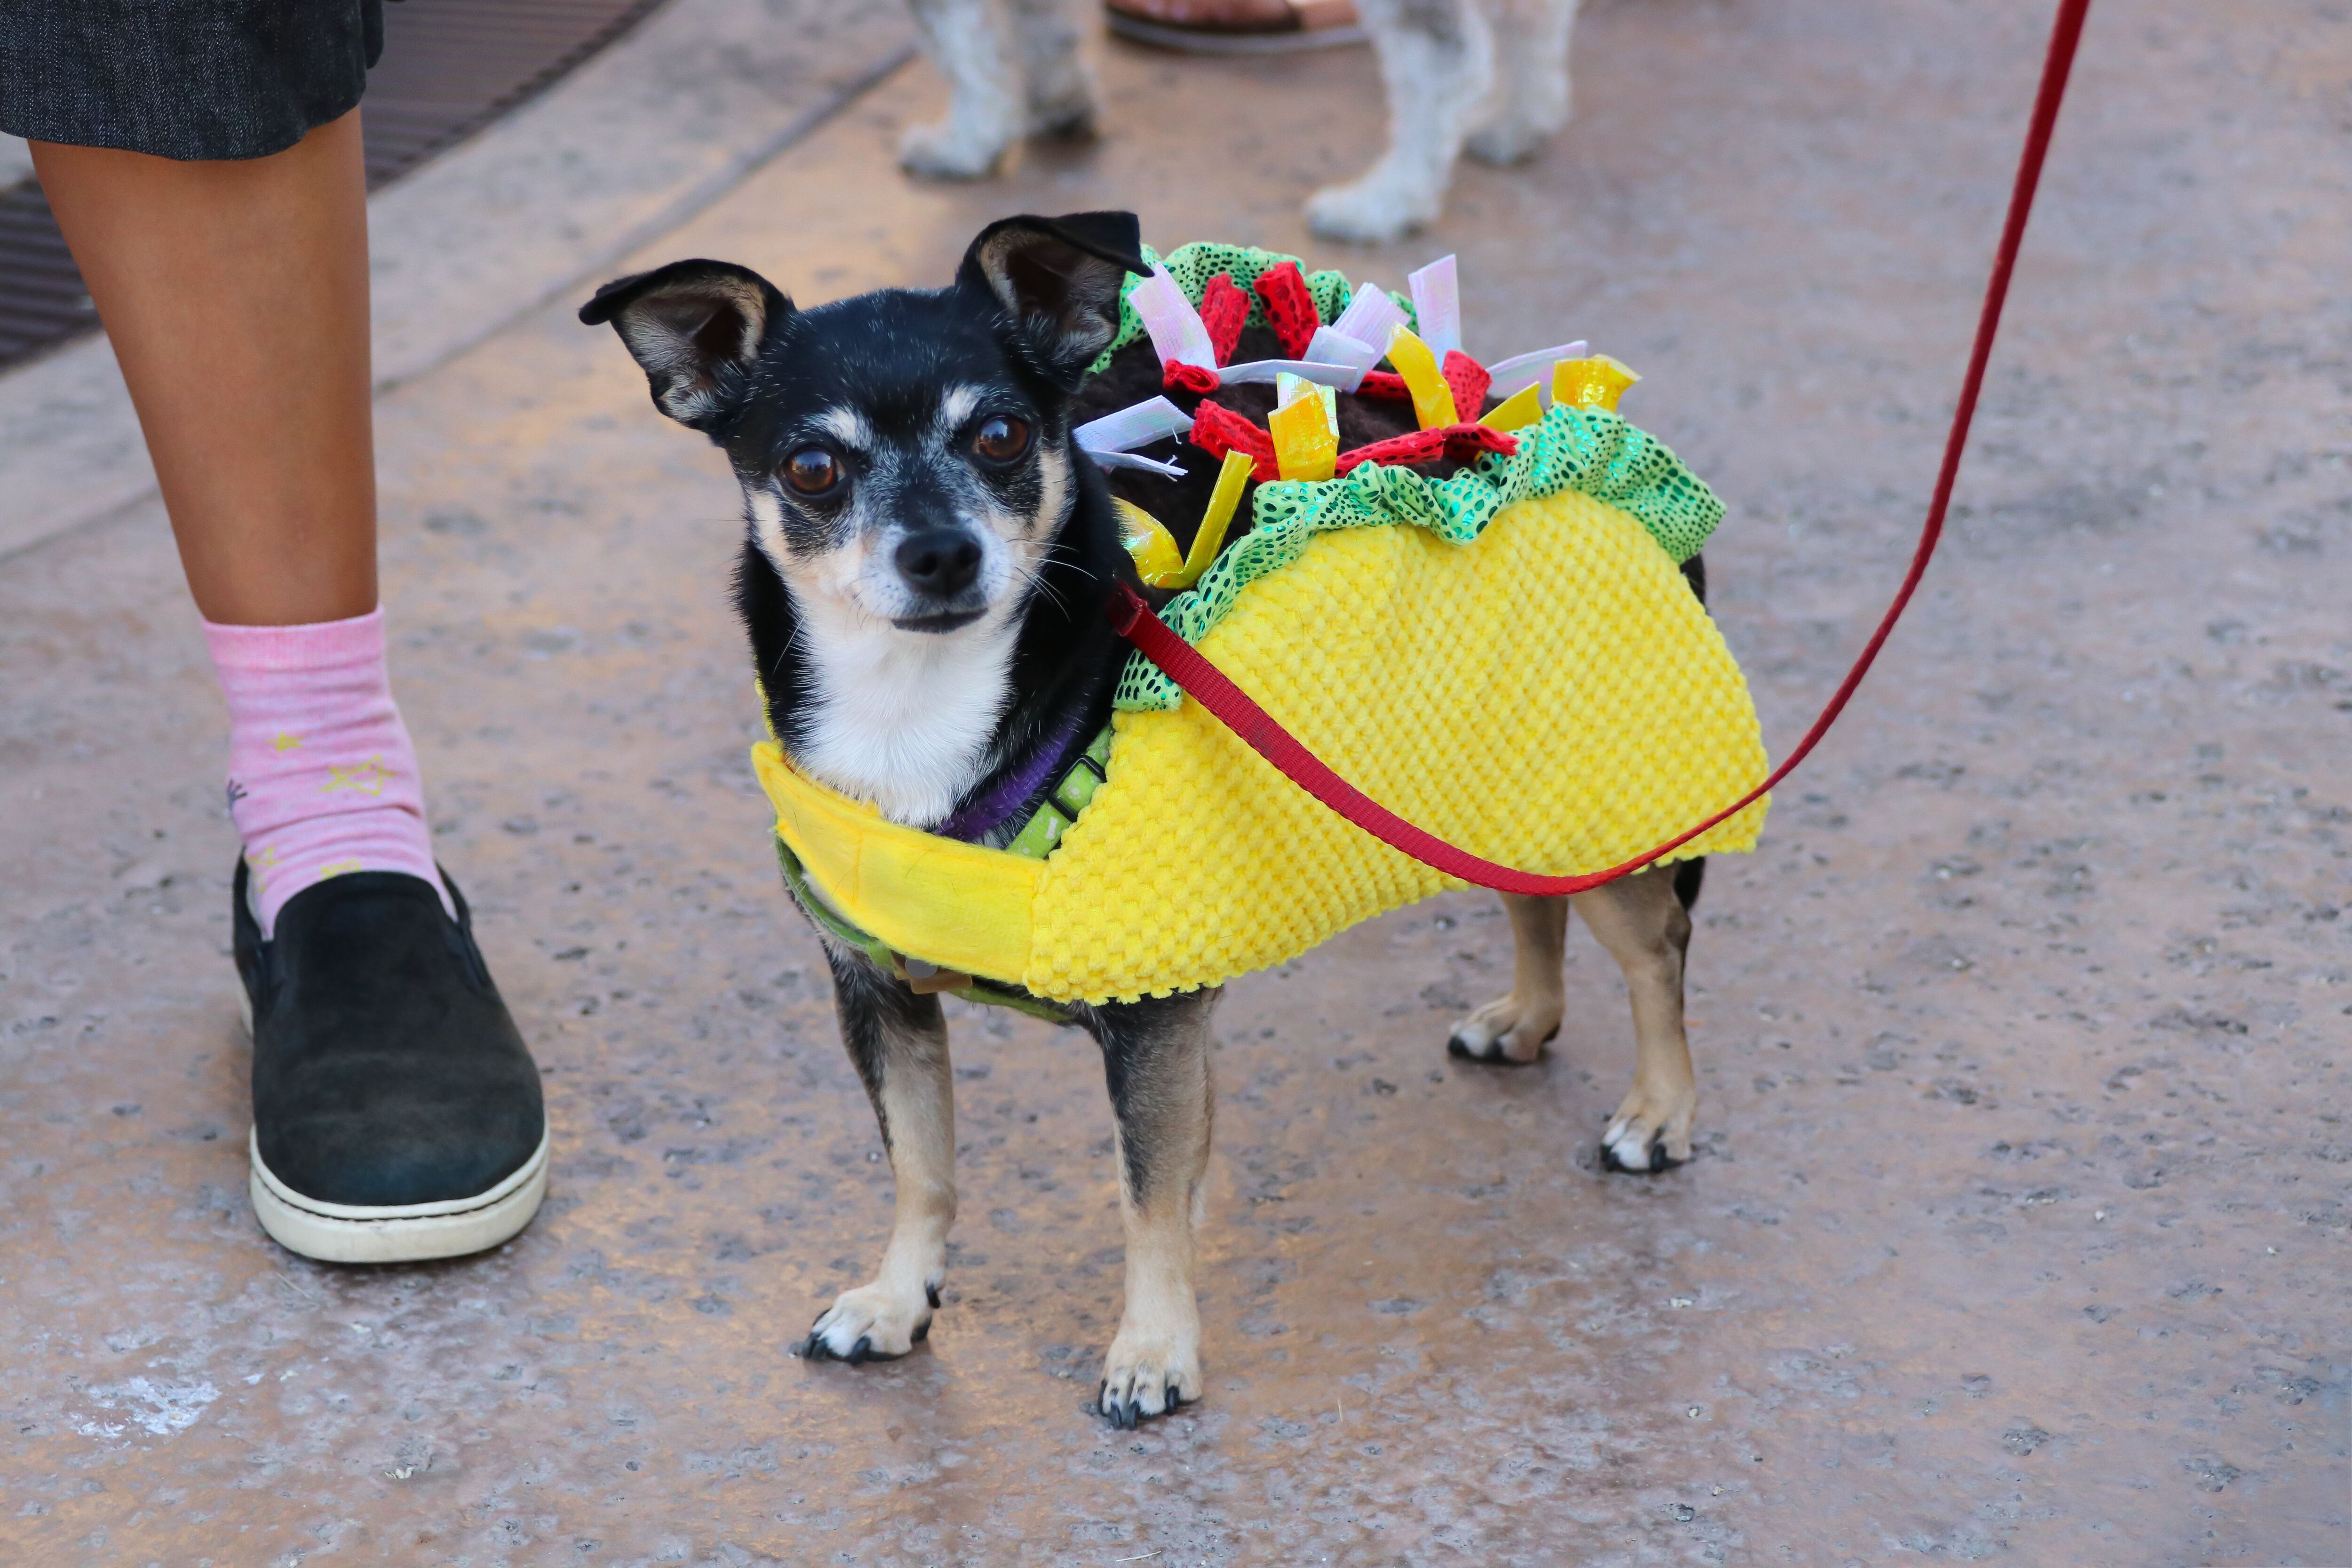 A chihuahua is dressed as a taco.